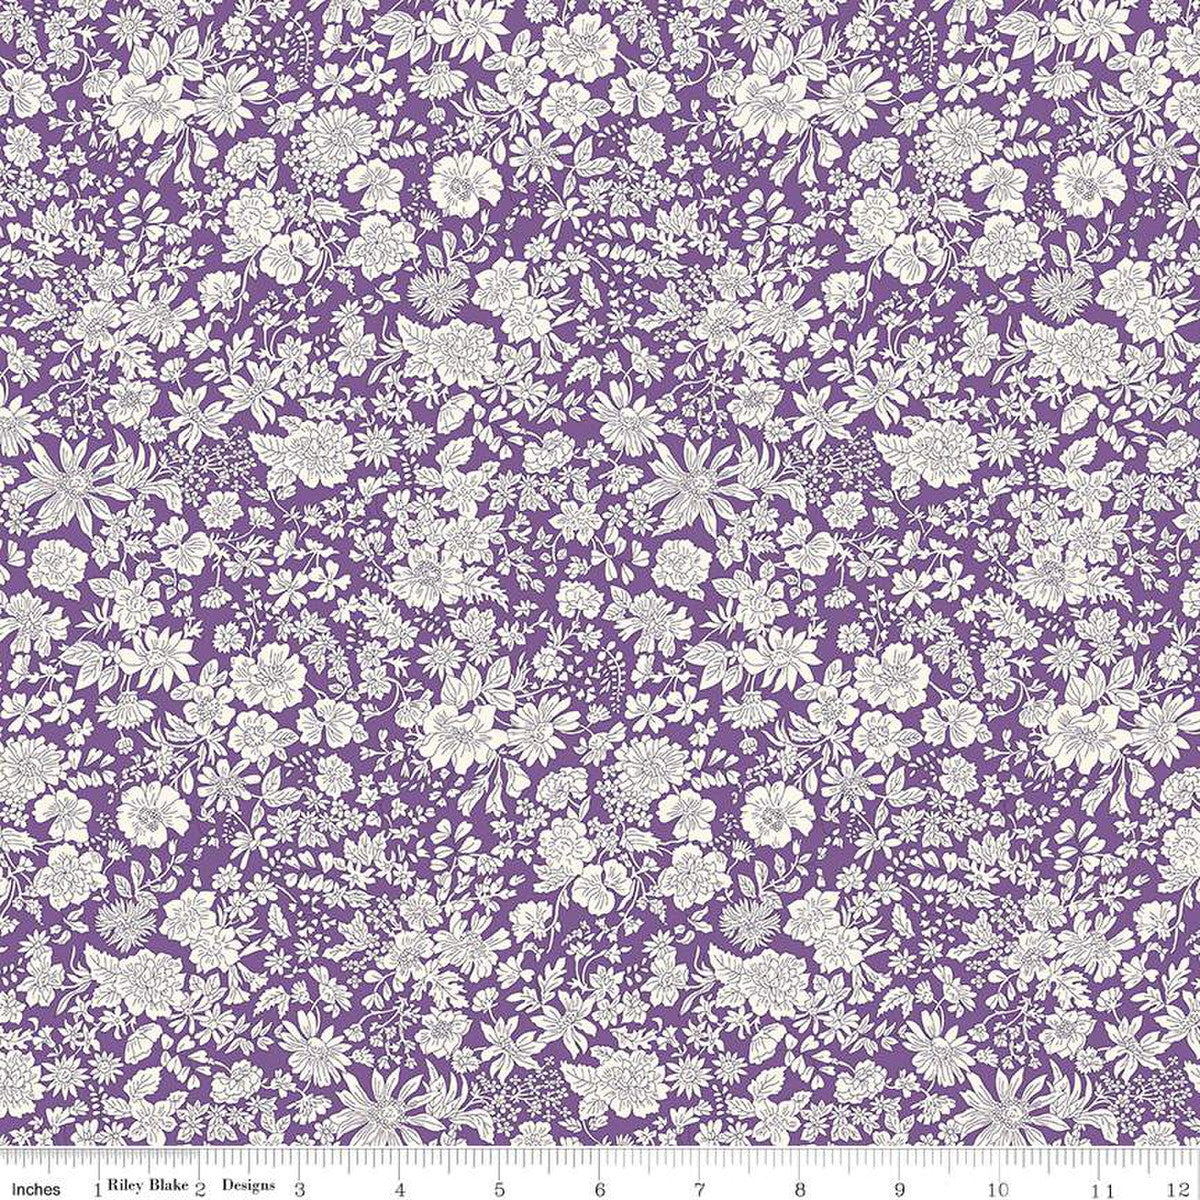 Damson - Emily Belle - Liberty of London quilting cotton